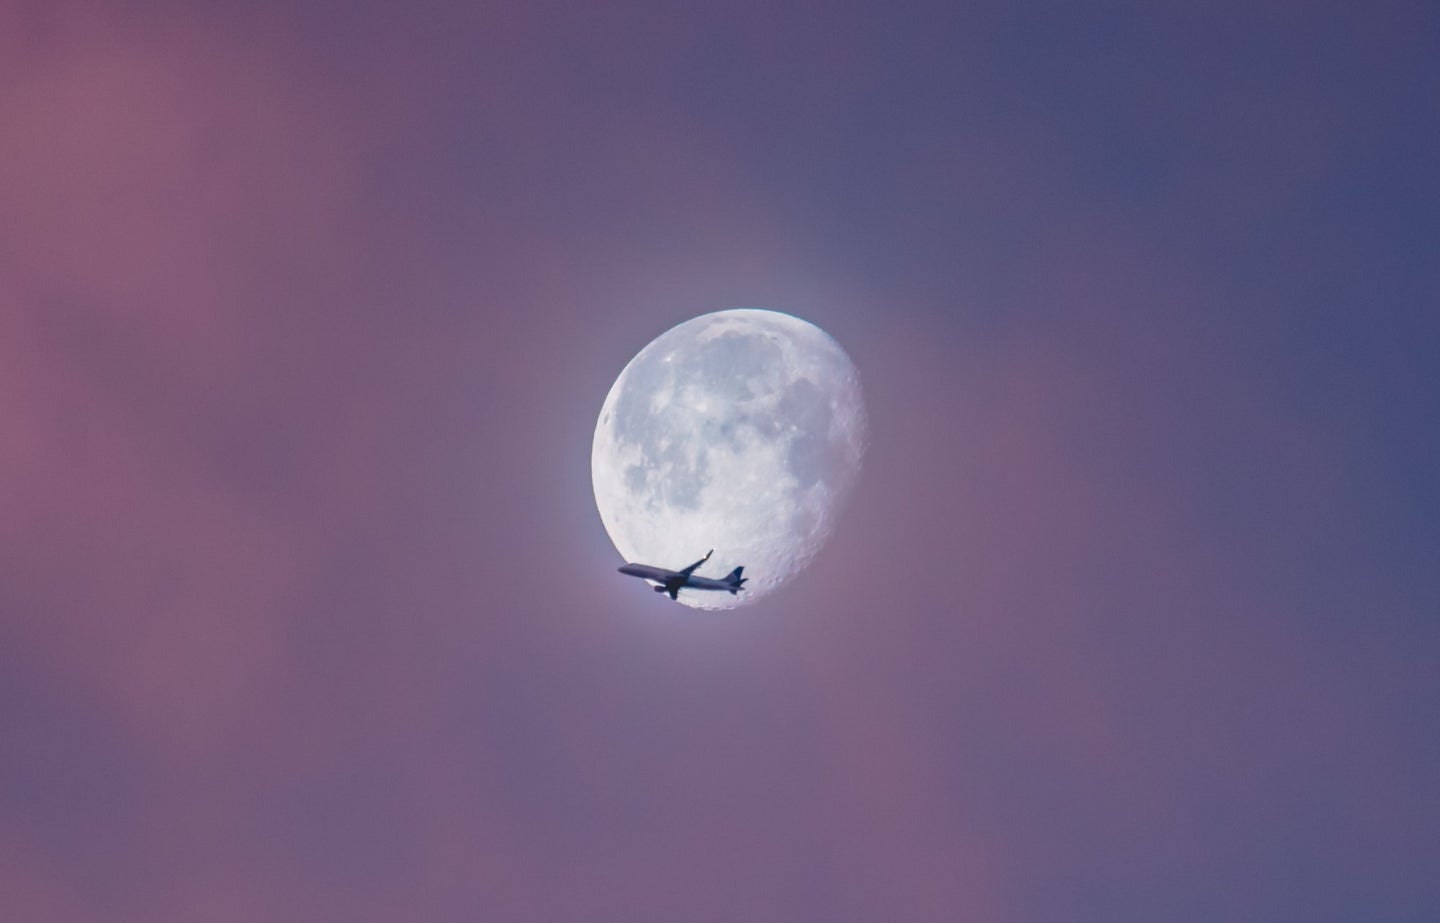 Commercial airplane flying across almost full moon. The question is: Are long flights safe?